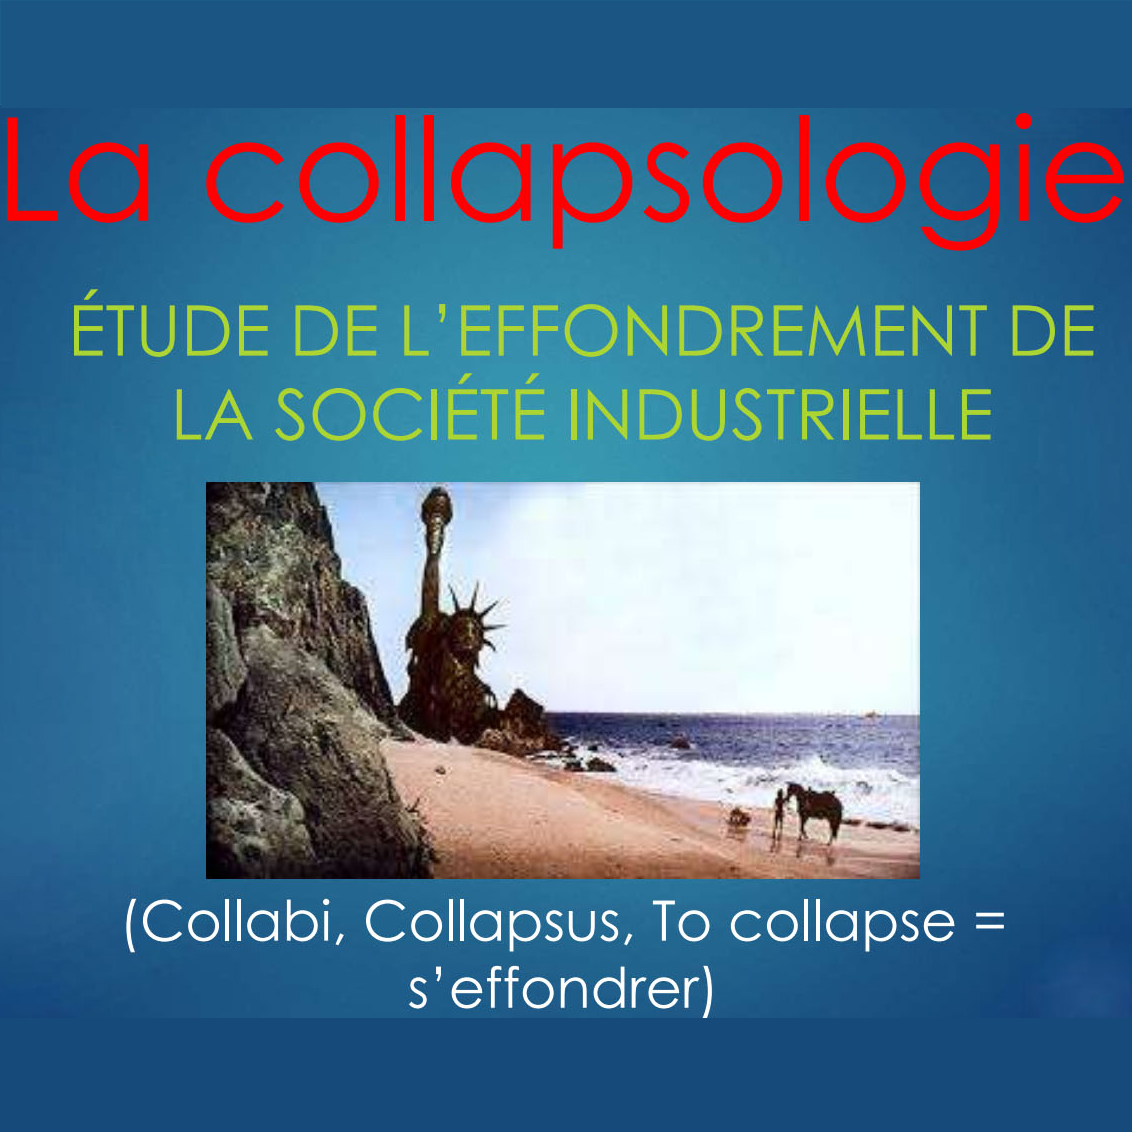 Collapsology: the risks of collapse